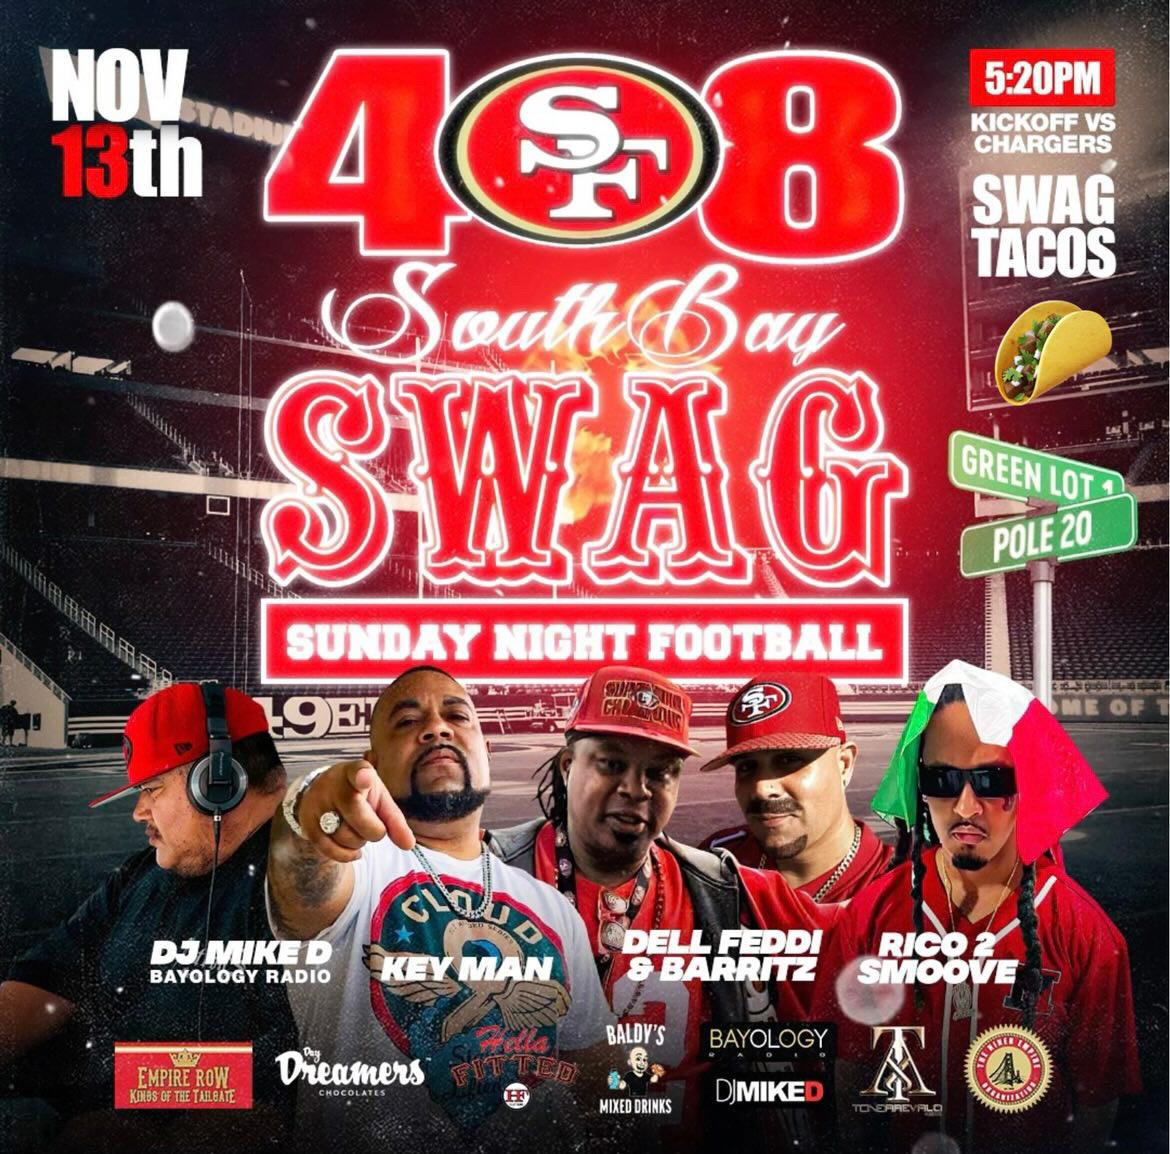 408 South Bay Swag SNF – Levi's Stadium Green Lot 1 Pole 20 (11/13/2022) -  Barritz™ | Official Site